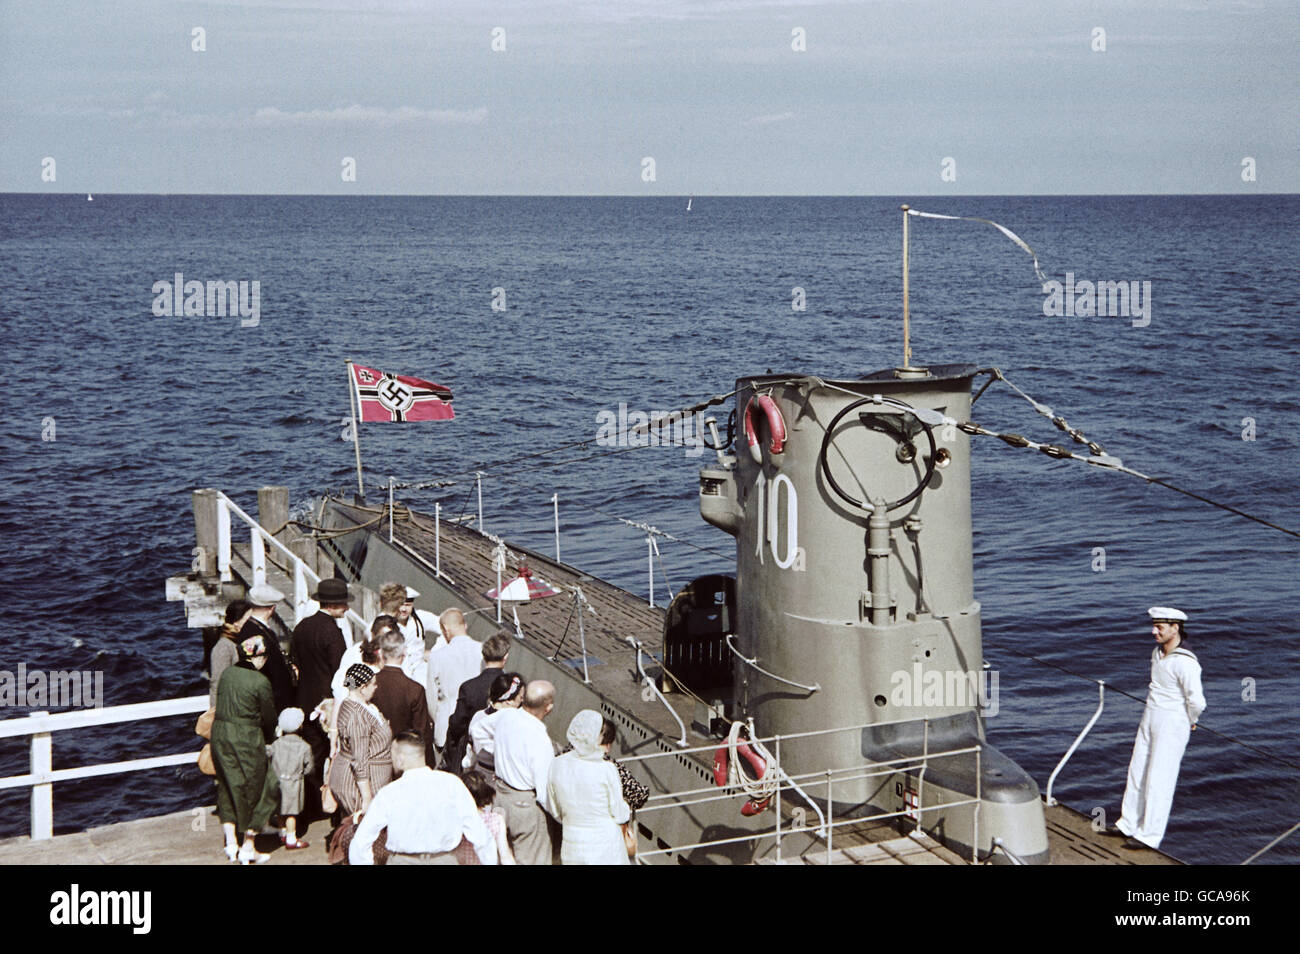 Nazism / National Socialism, military, navy, German submarine U-10, Sellin, Germany, 28.7.1938, Unterseeboot, U 10, Rügen island, people, tourists, looking at, attraction, Europe, German Reich, Mecklenburg-Vorpommern, Baltic Sea, pier, flag, swastika, Third Reich, National Socialism, Rugen, Ruegen, historic, historical, 1930s, 30s, 20th century, Additional-Rights-Clearences-Not Available Stock Photo